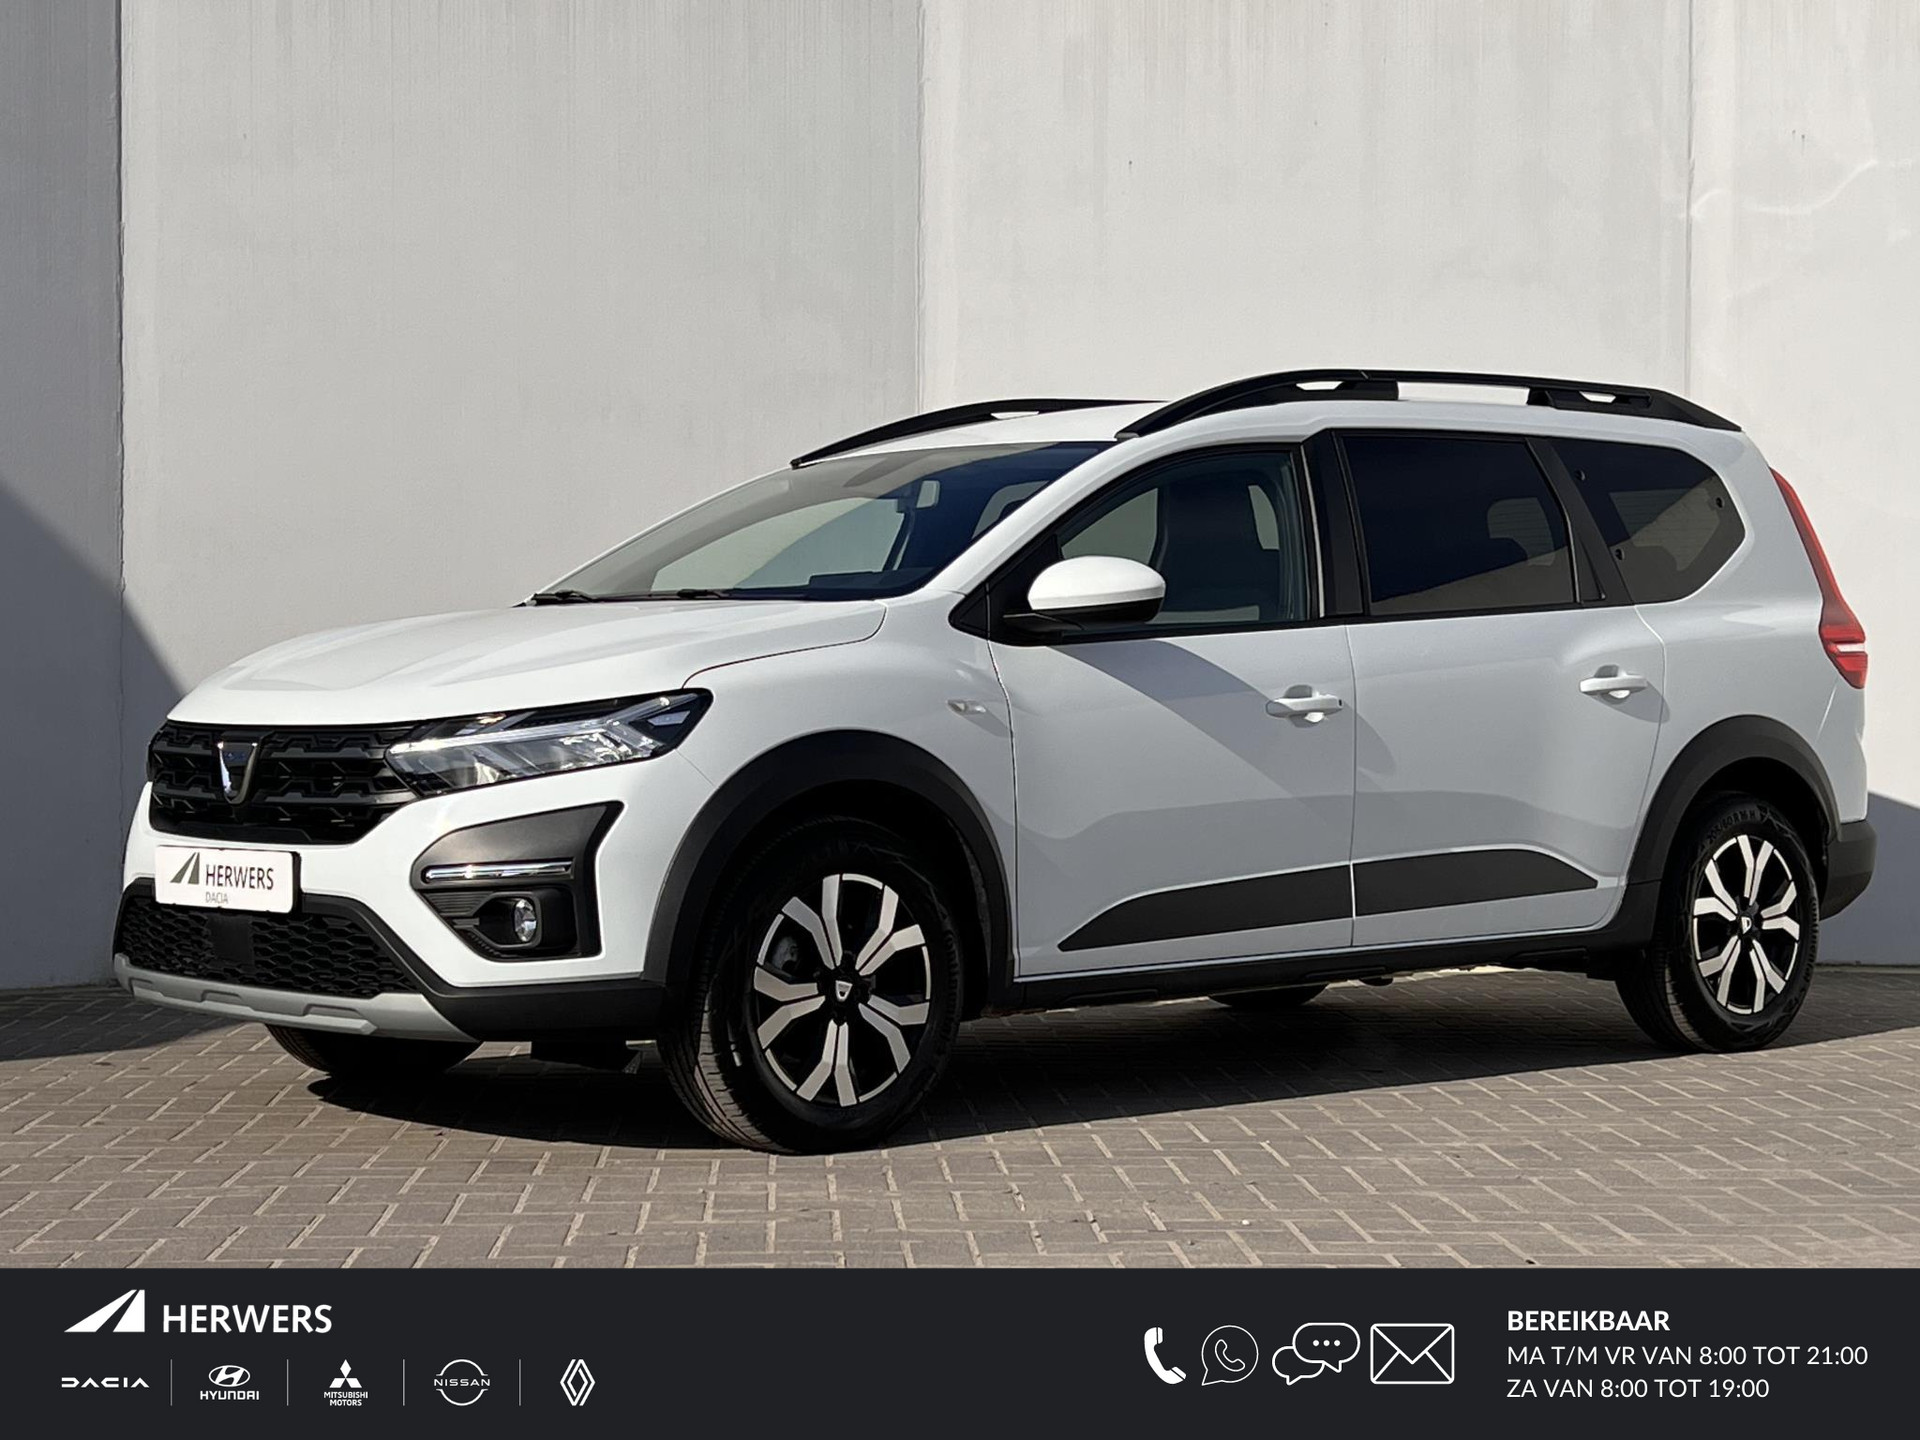 Dacia Jogger 1.0 TCe 110 Extreme 7p. / Zeven persoons / Navigatie via Apple Carplay of Android Auto / Stoelverwarming /